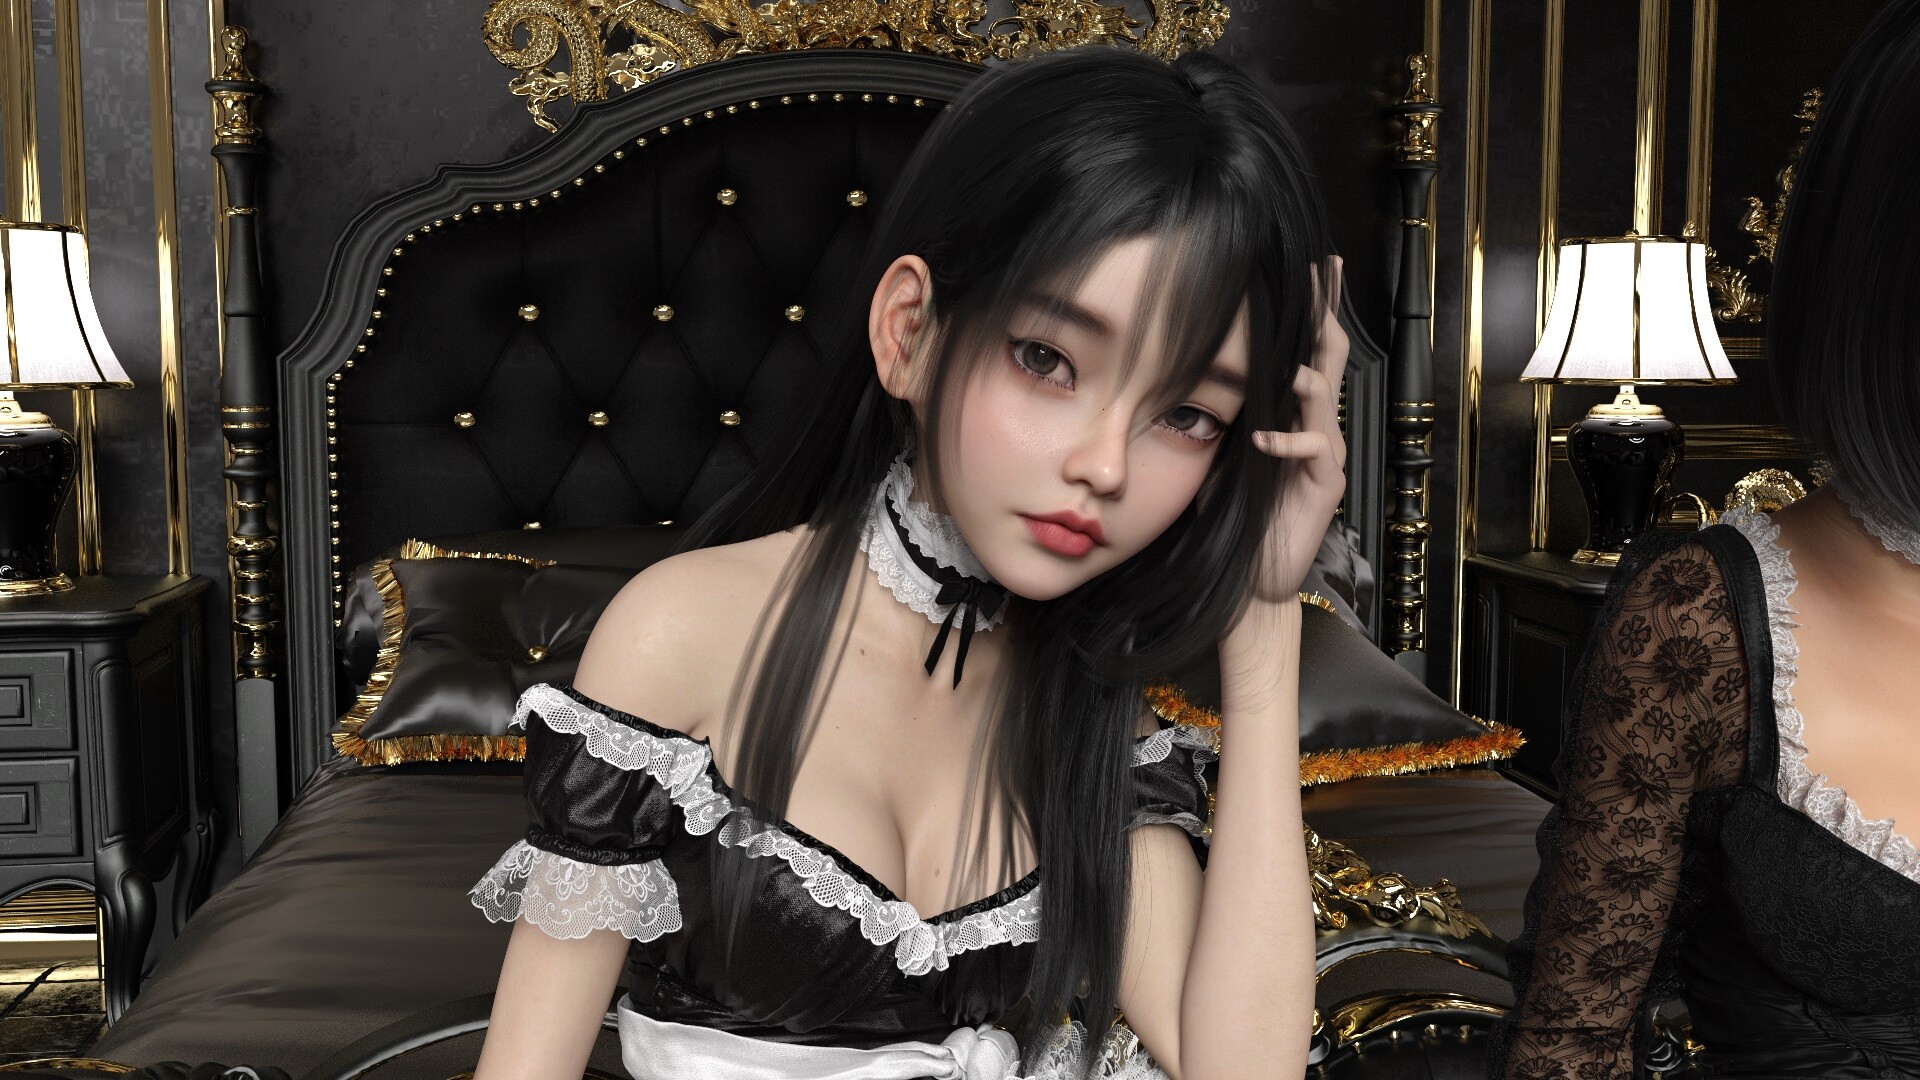 Sir Tancrede CGi Women Dark Hair Maid Outfit Maid Hands In Hair Bed Pillow Gold Portrait Asian 1920x1080